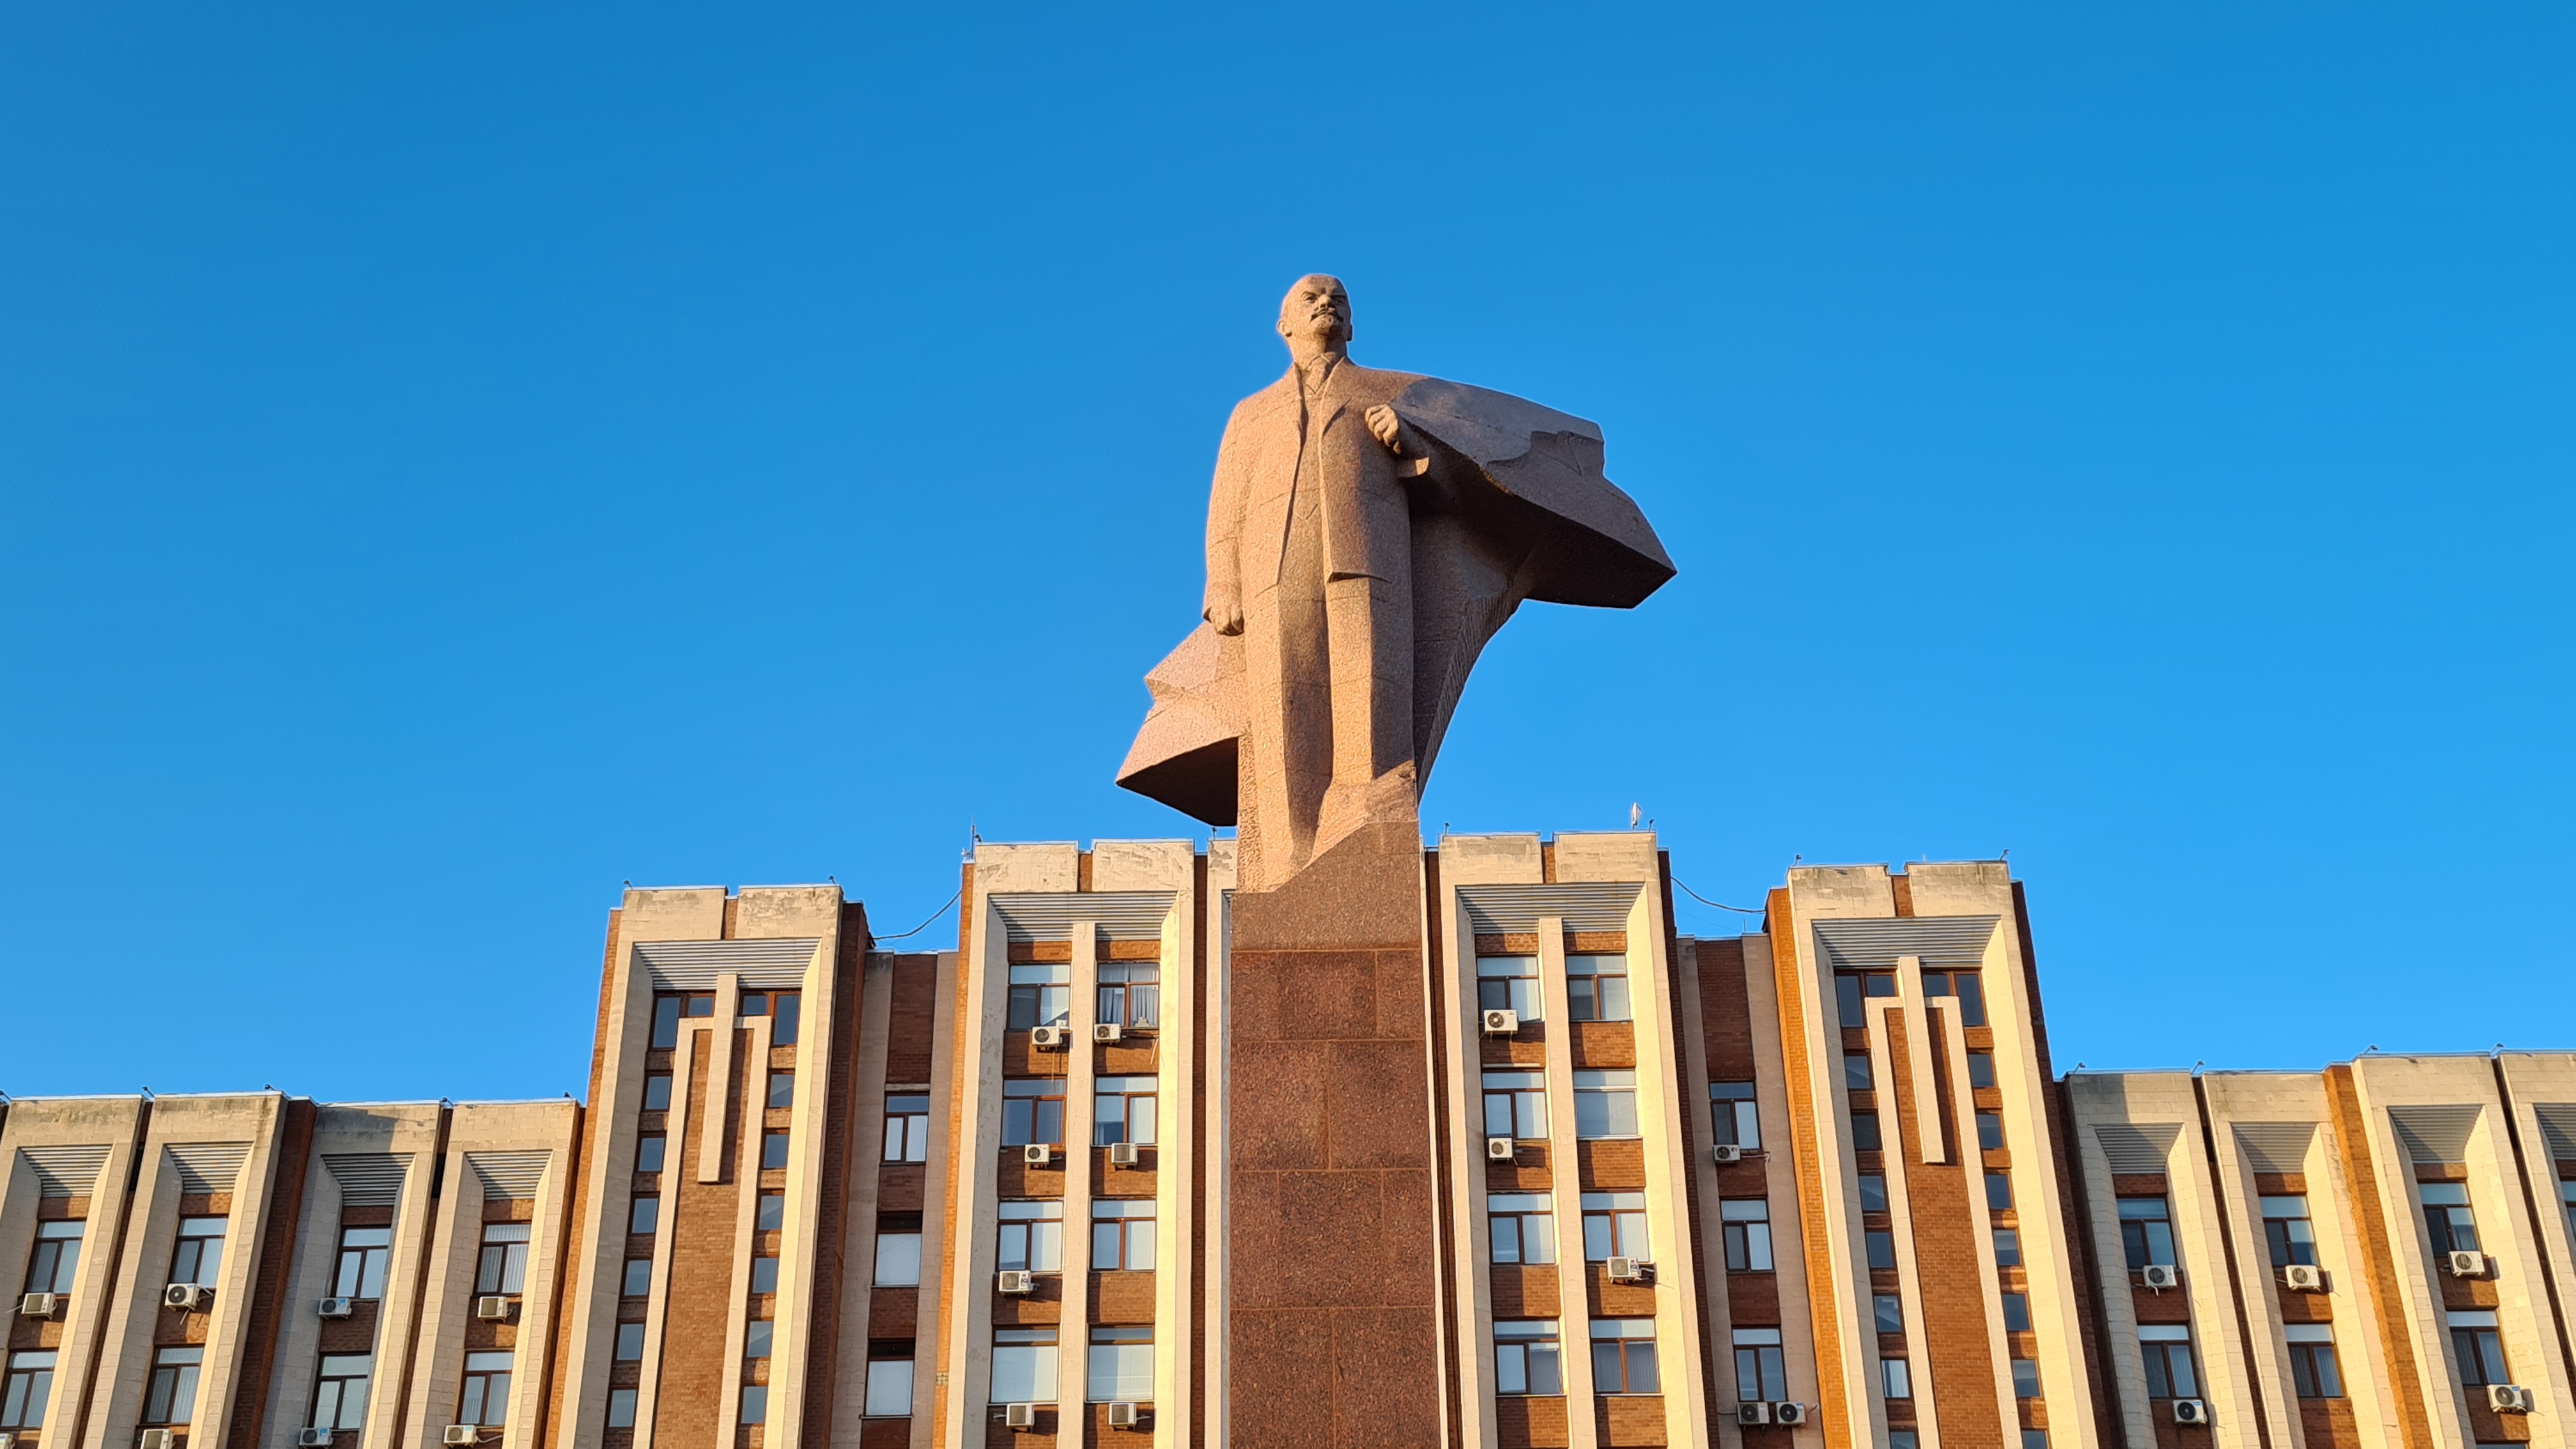 Tiraspol, Moldova – February 13, 2022: Lenin statue, made out of granite and modeled in 1970 by Nikolai Tomsky. Currently it is in front of the Transnistria Parliament but it has been on Leninplatz (currently United Nations Square) in East Berlin until 1992.